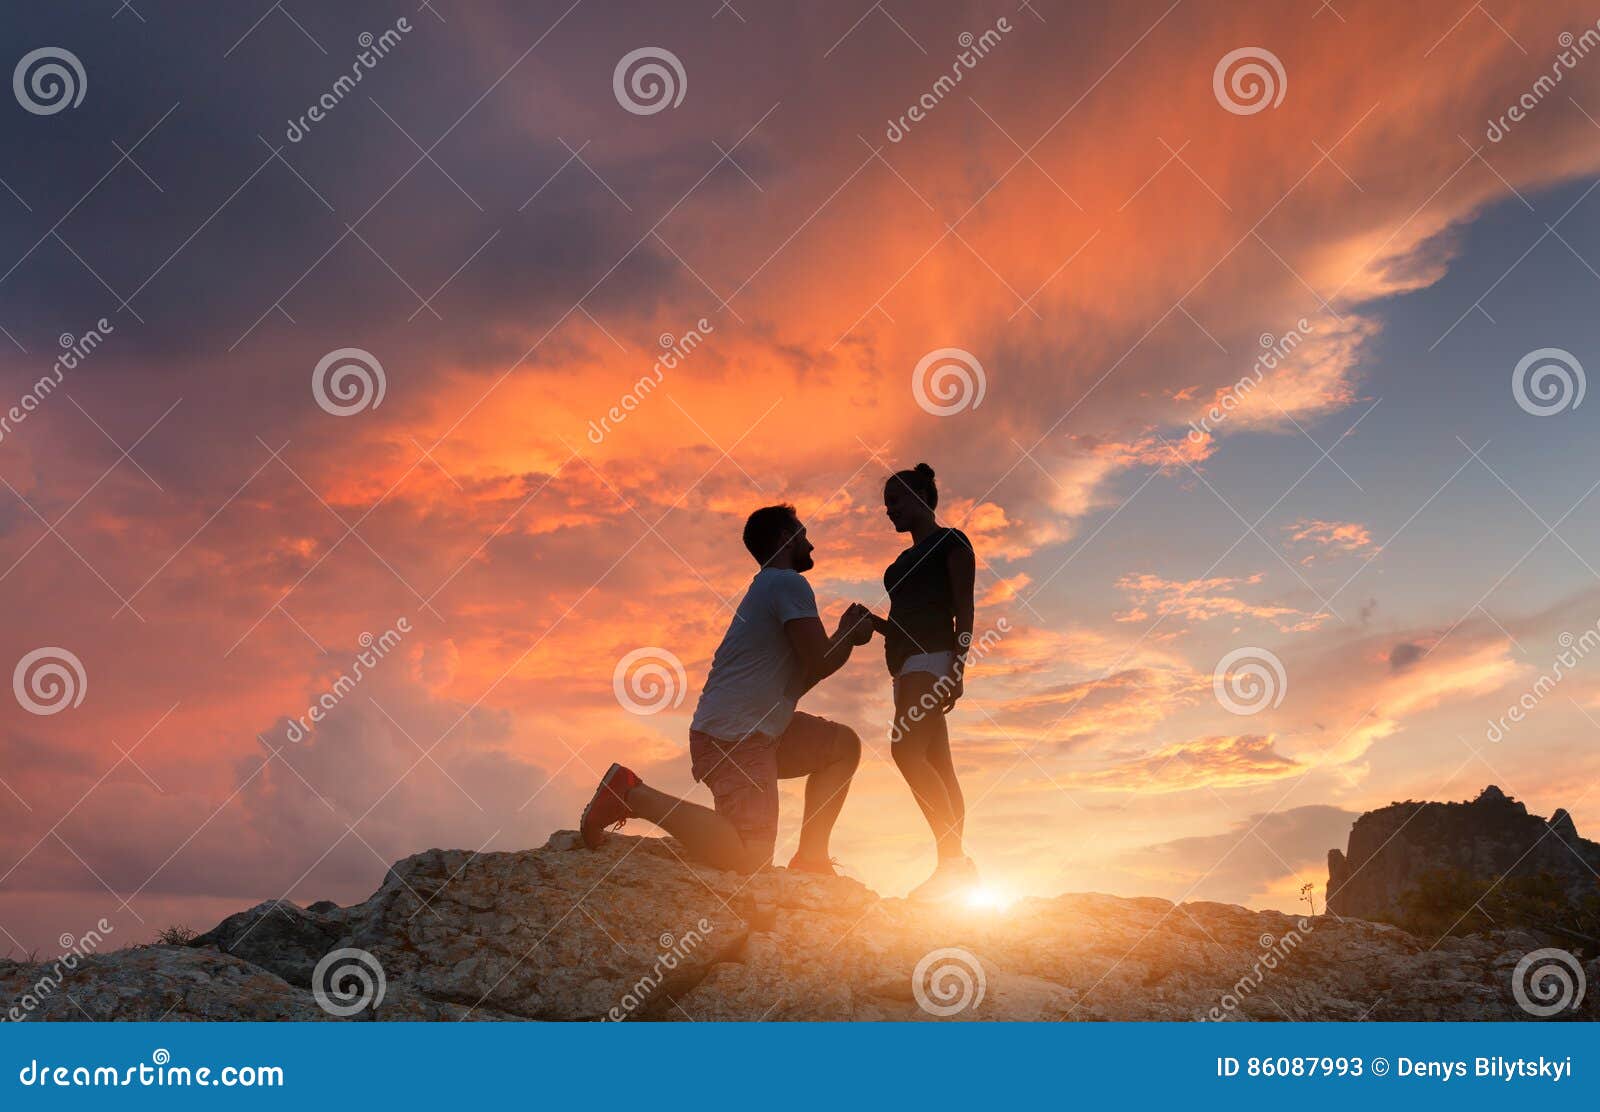 silhouettes of a man making marriage proposal to his girlfriend